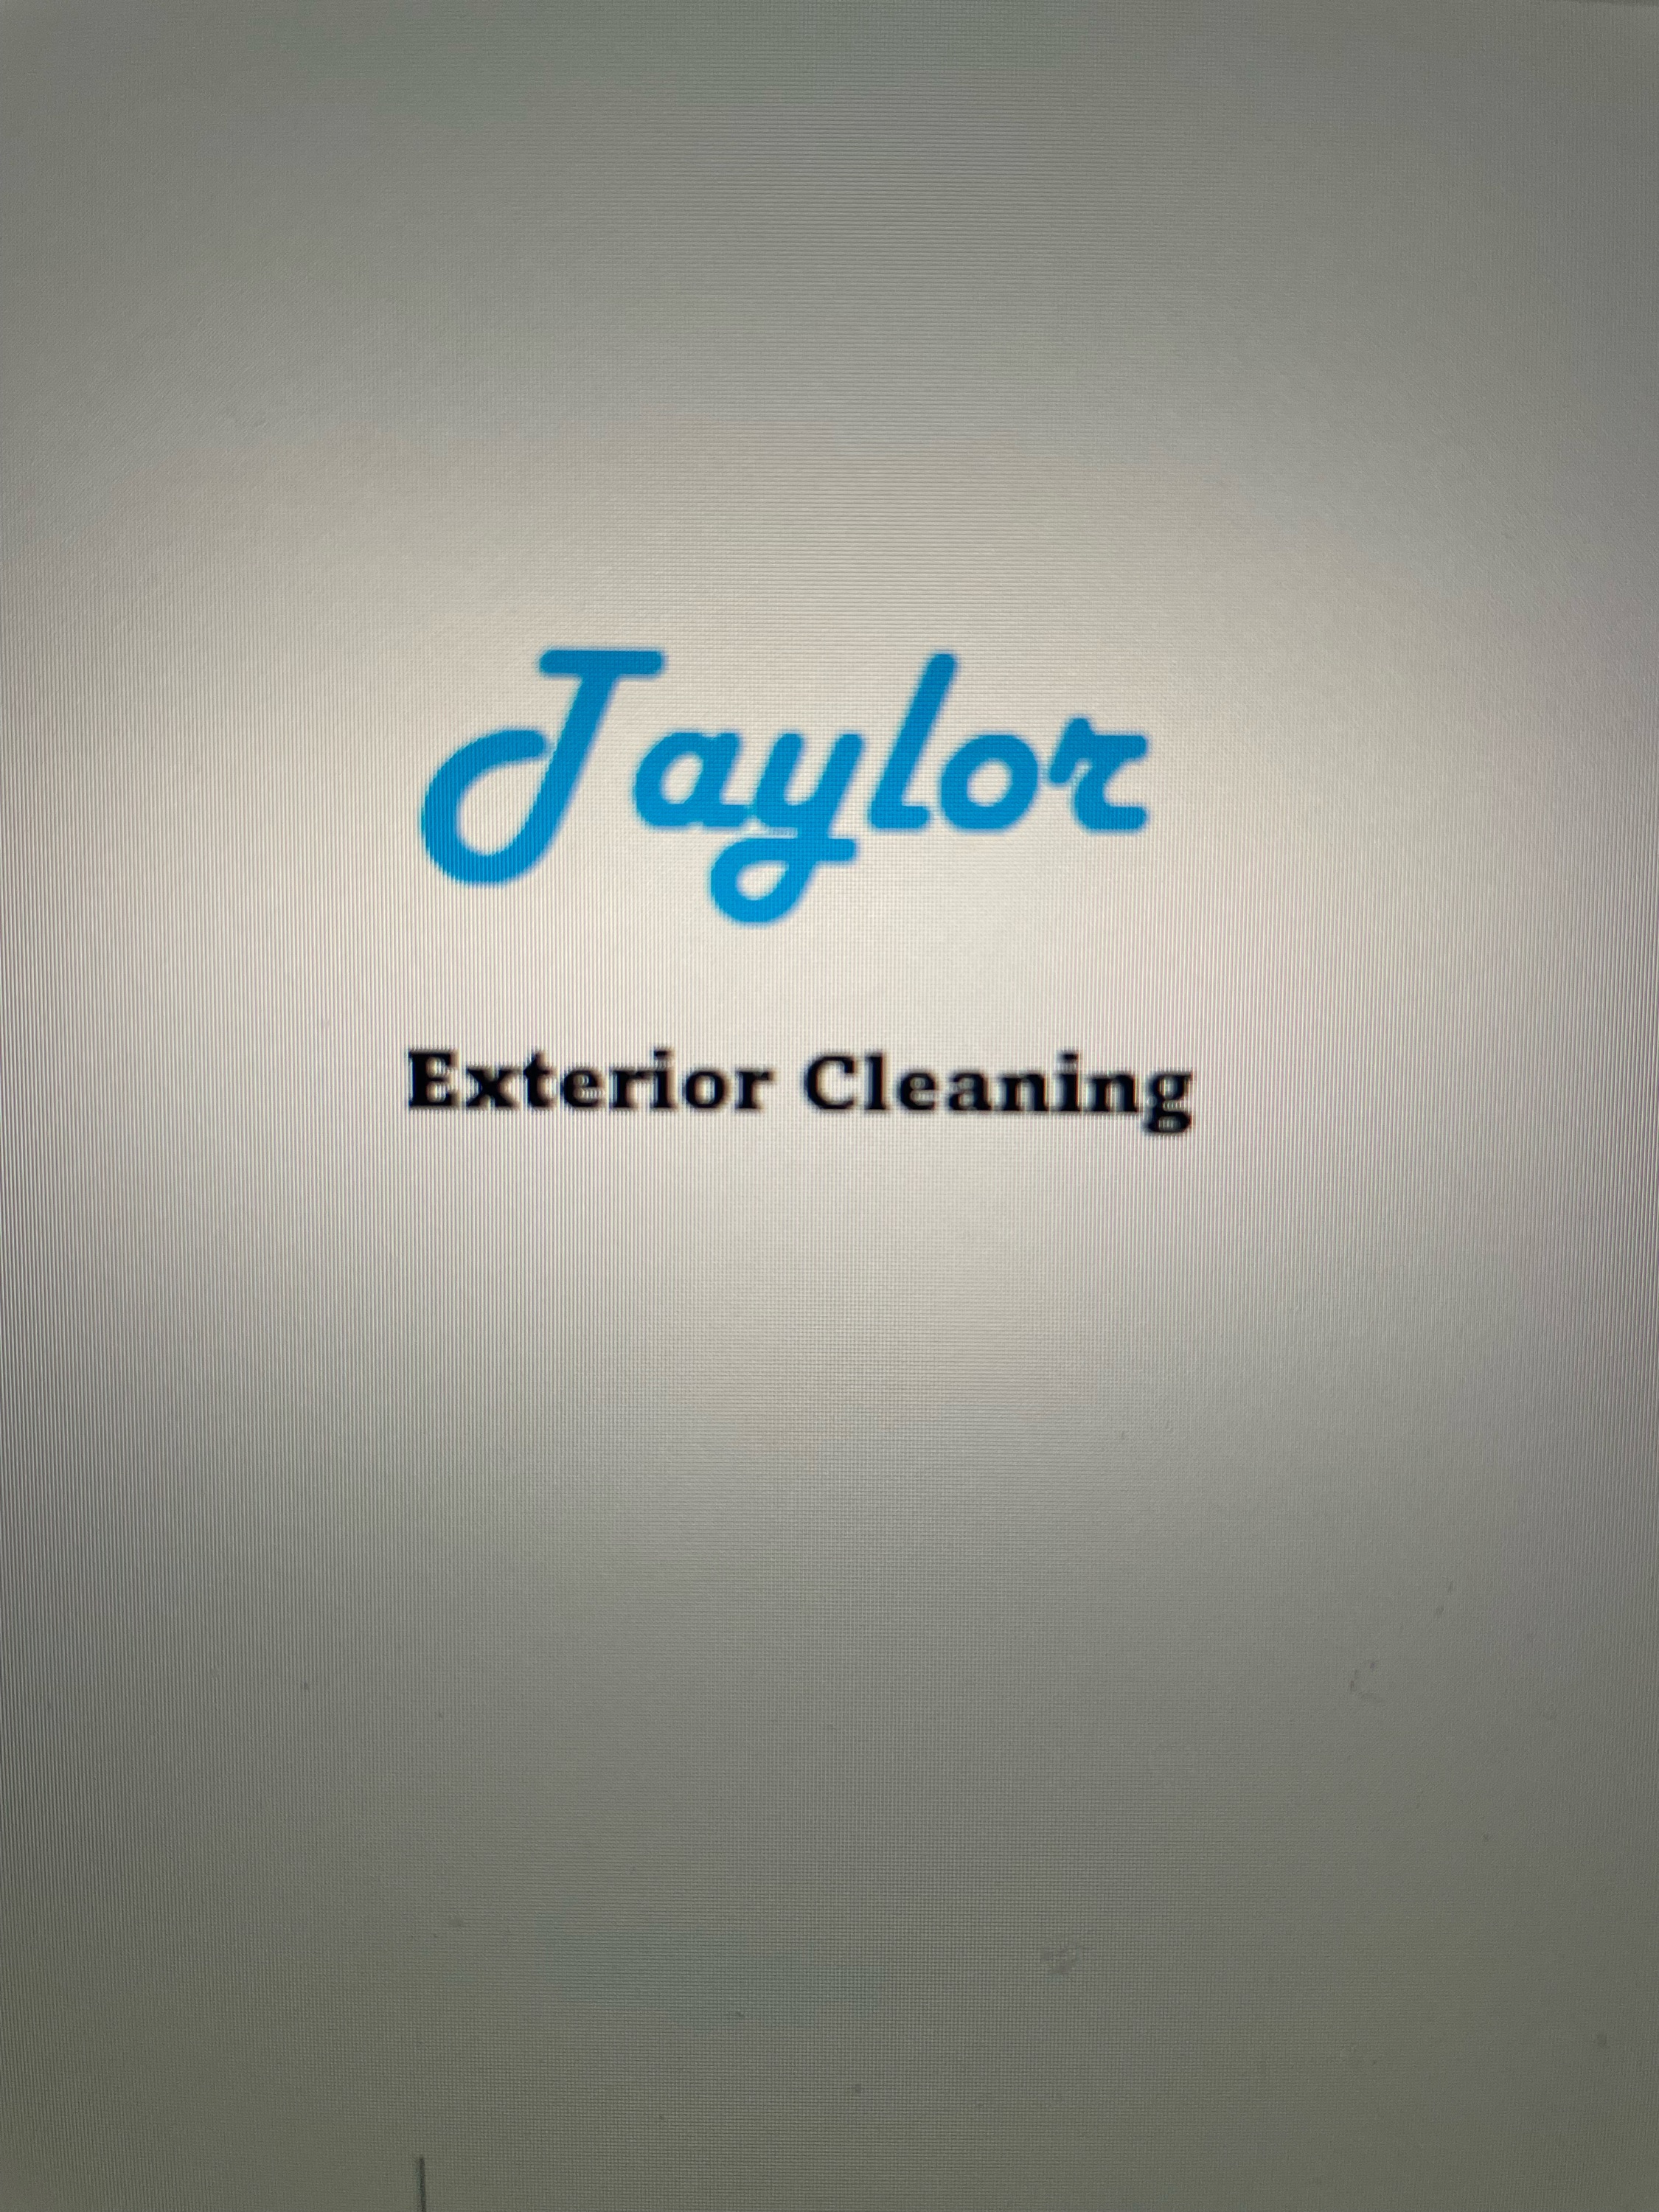 Taylor Exterior Cleaning Logo